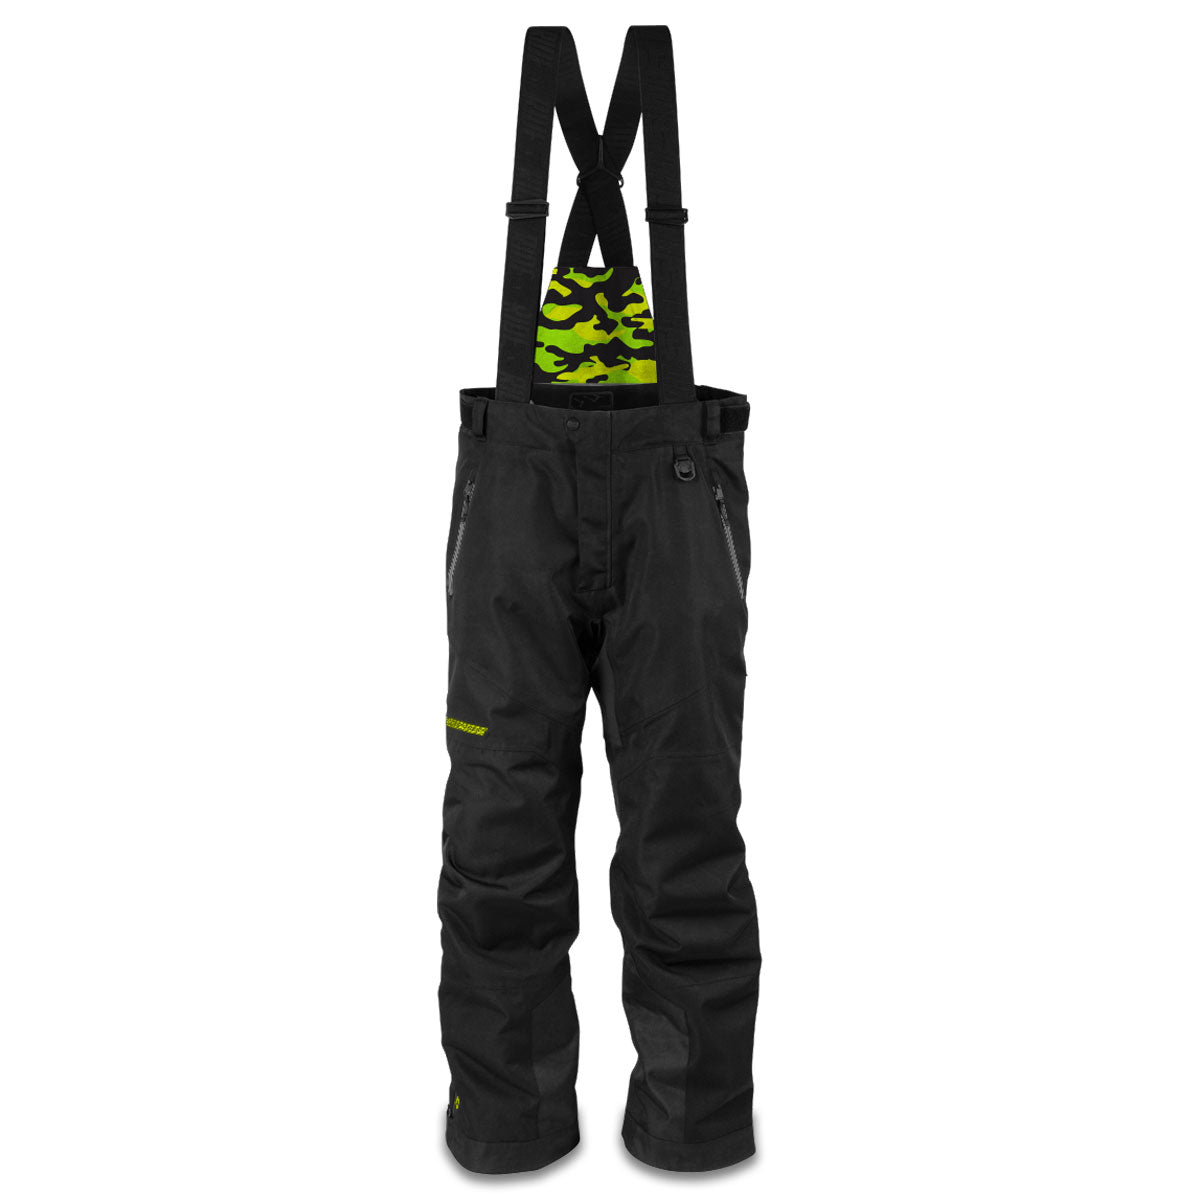 R-200 Insulated Crossover Pant - Covert Camo / XS